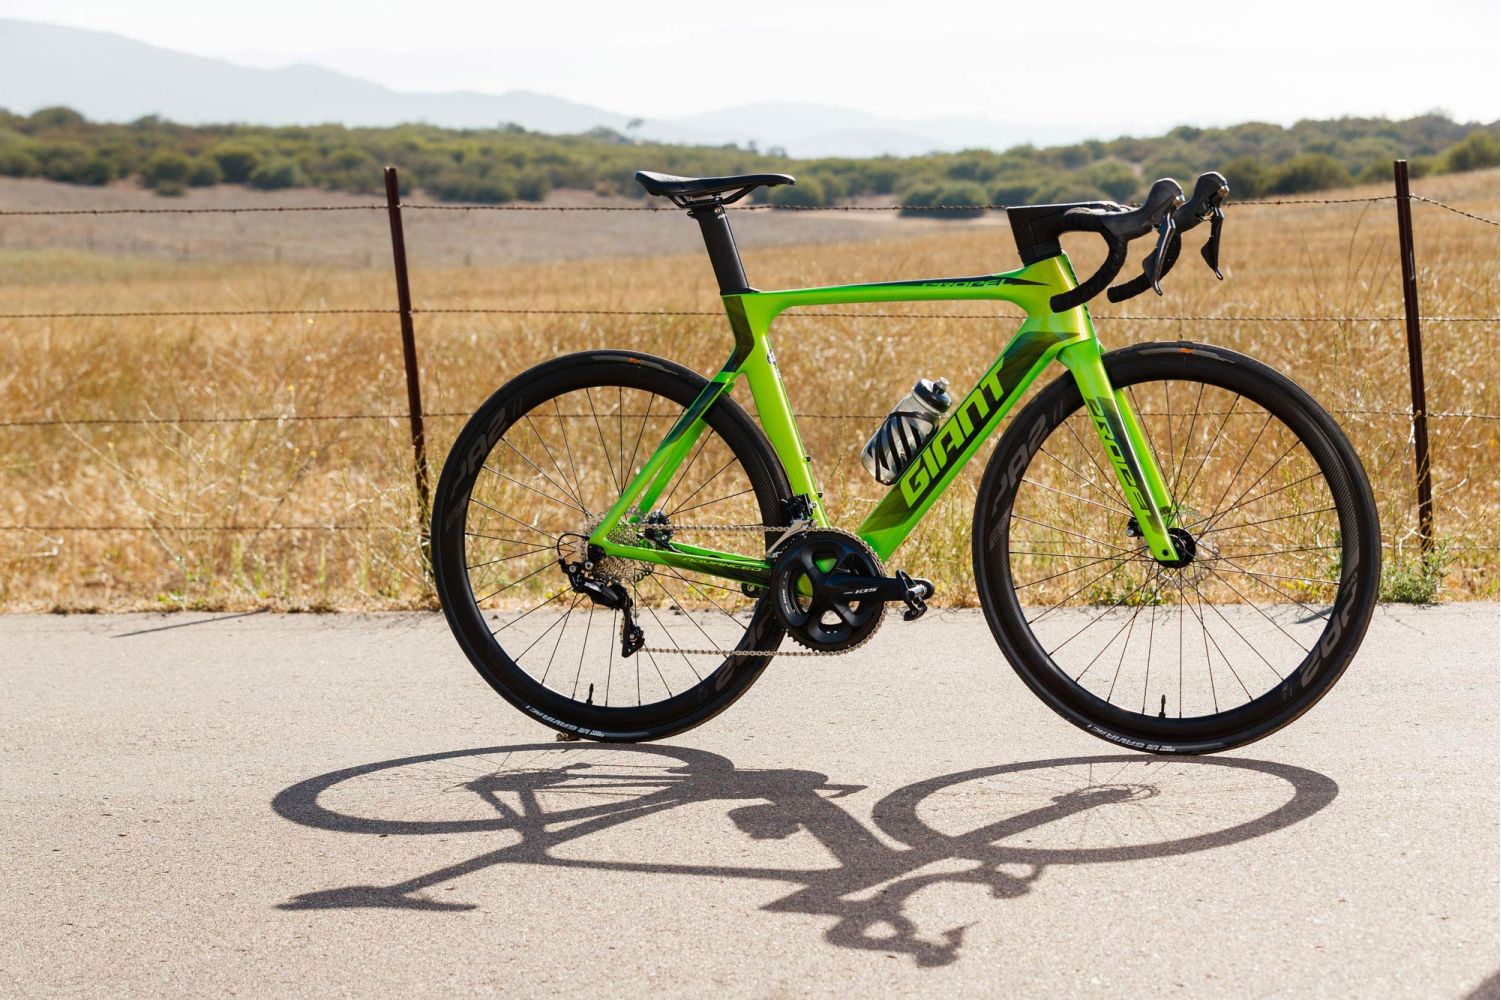 giant propel advanced 2 disc review